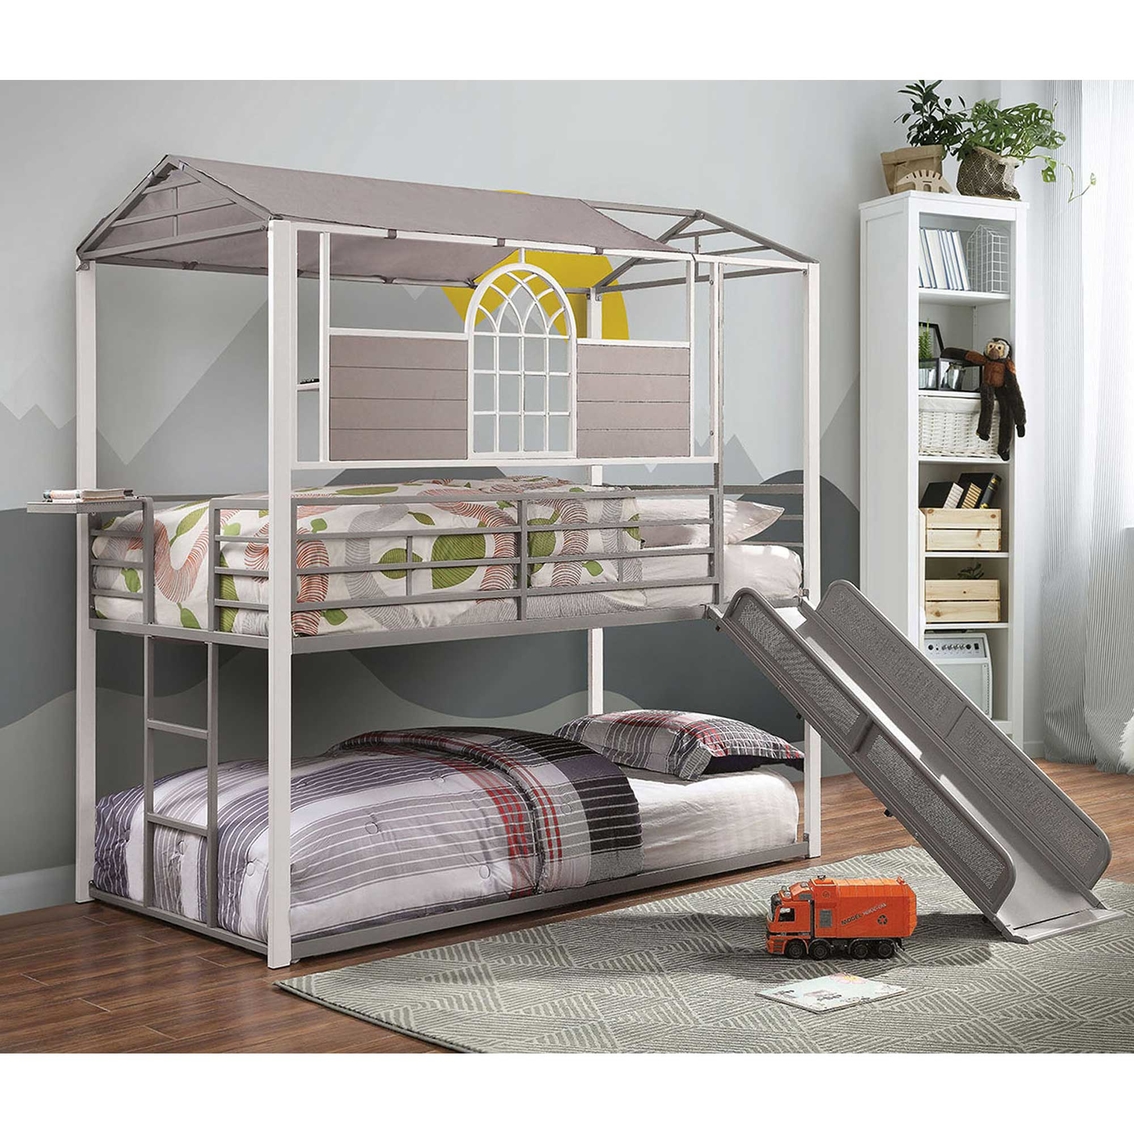 Twin Metal Bunk Bed With Slide, Bunk Bed Slide Sold Separately